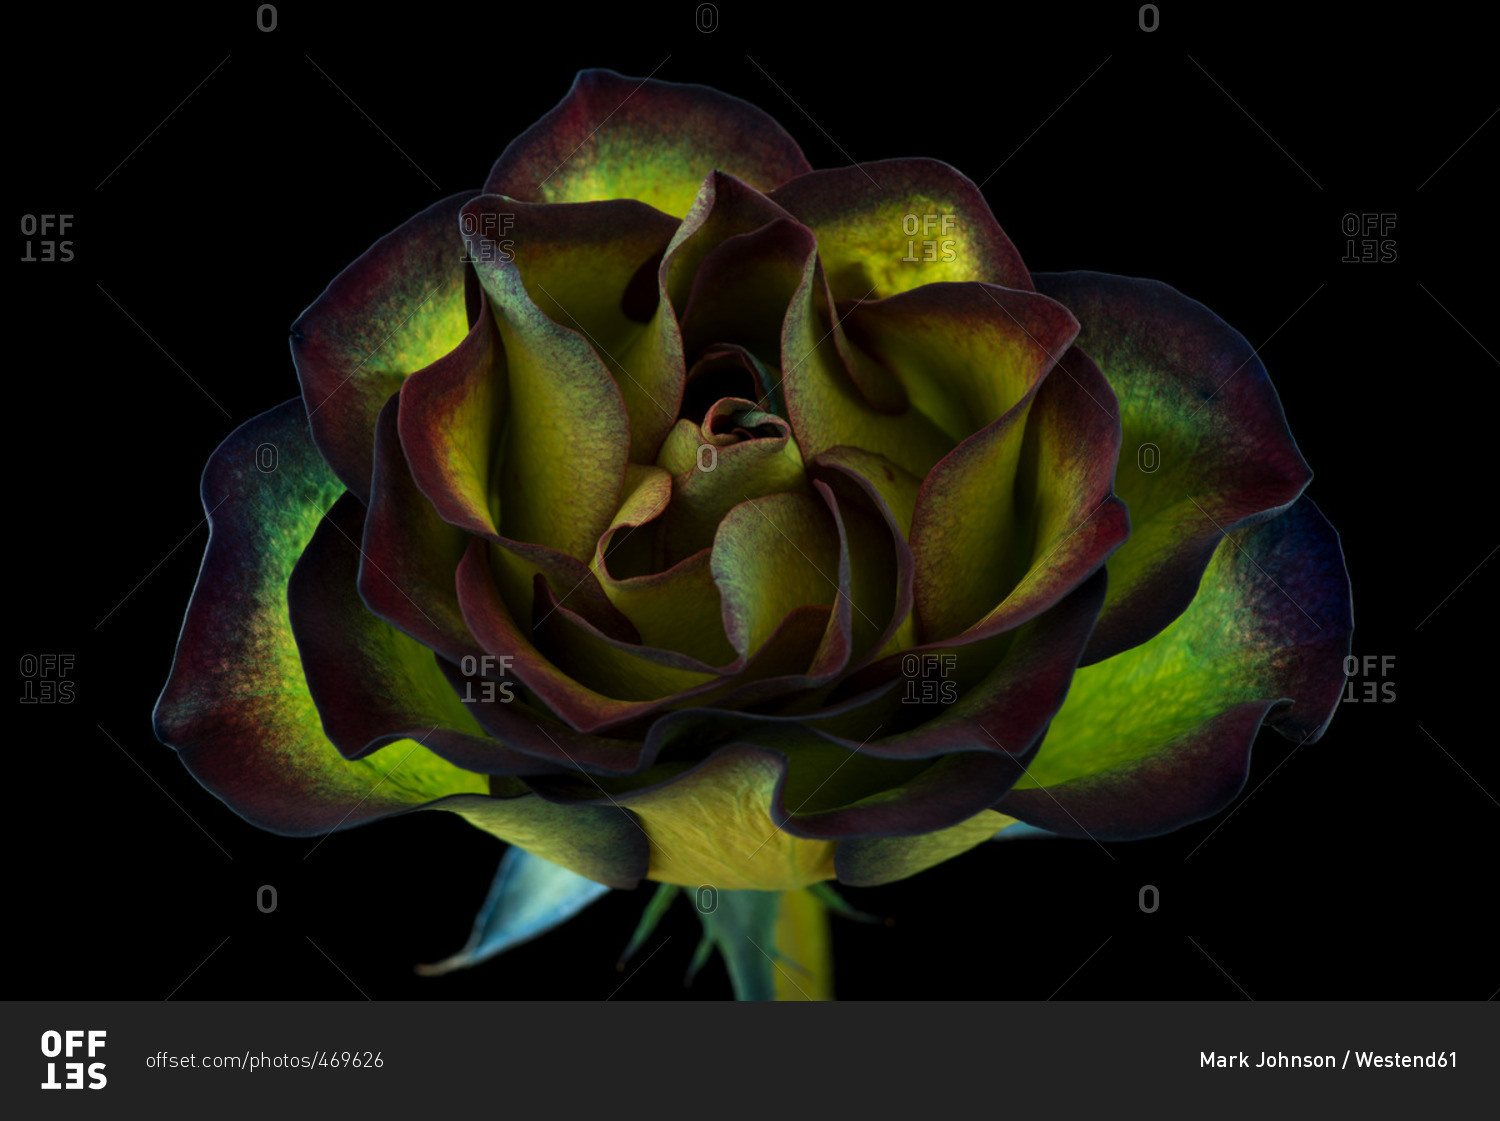 Green rose in front of black background